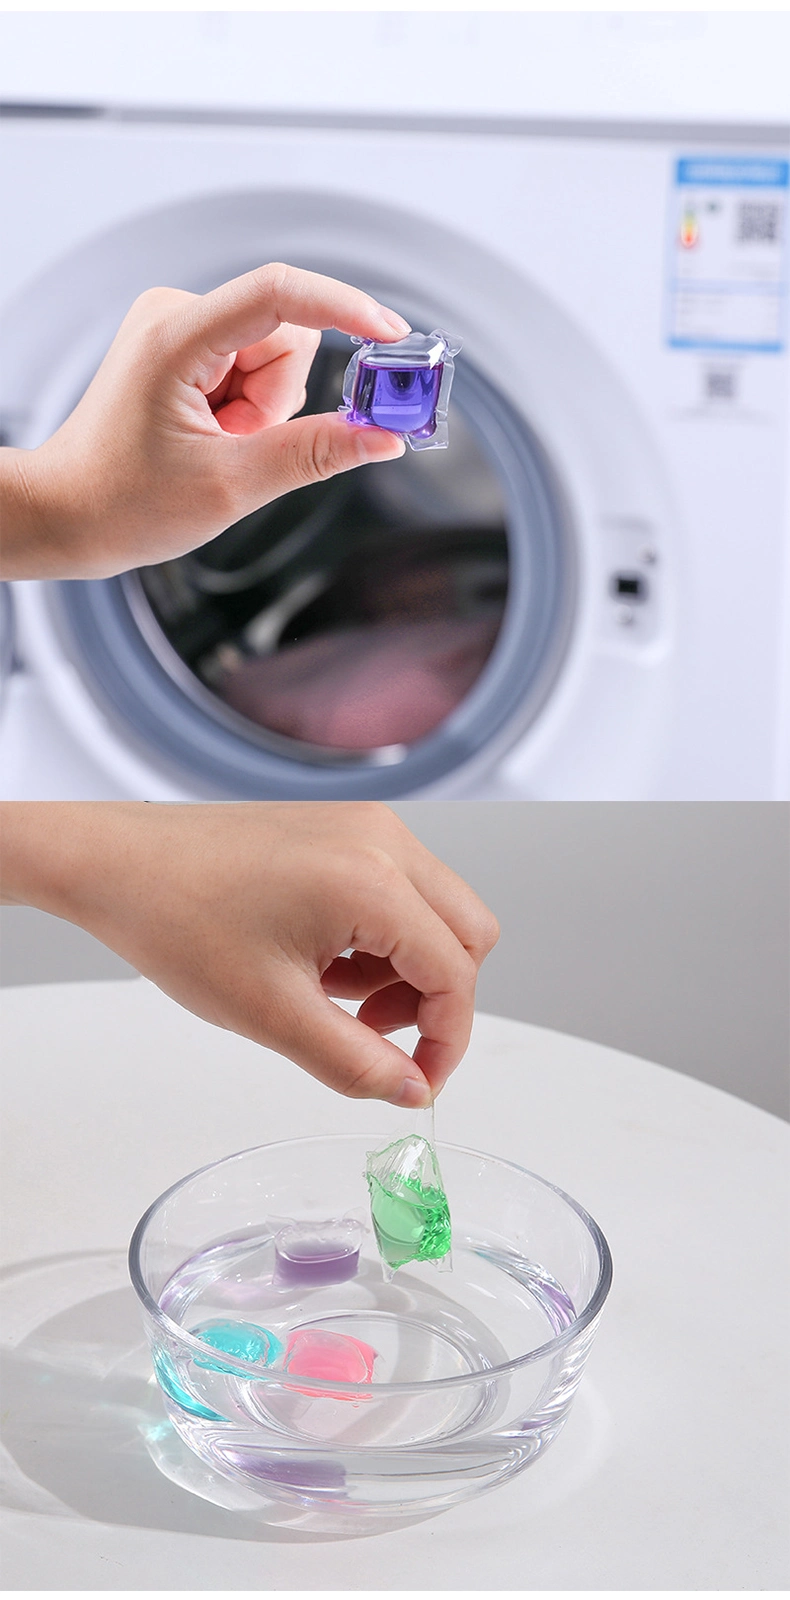 Eco-Friendly Biodegradable Laundry Beads Gel Detergent Pods Laundry Capsules